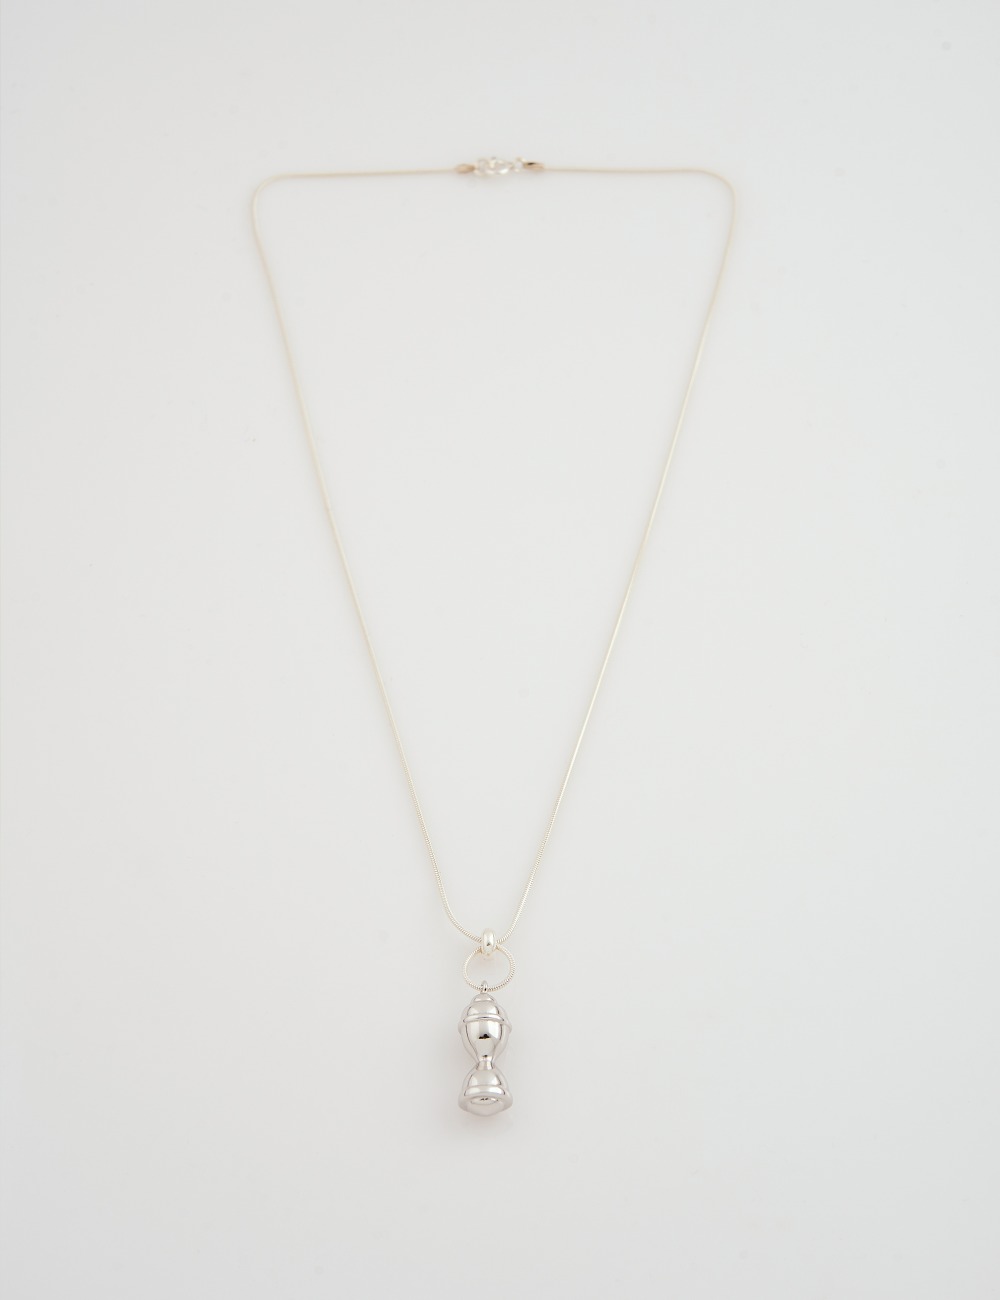 Sand glass Necklace (Silver)